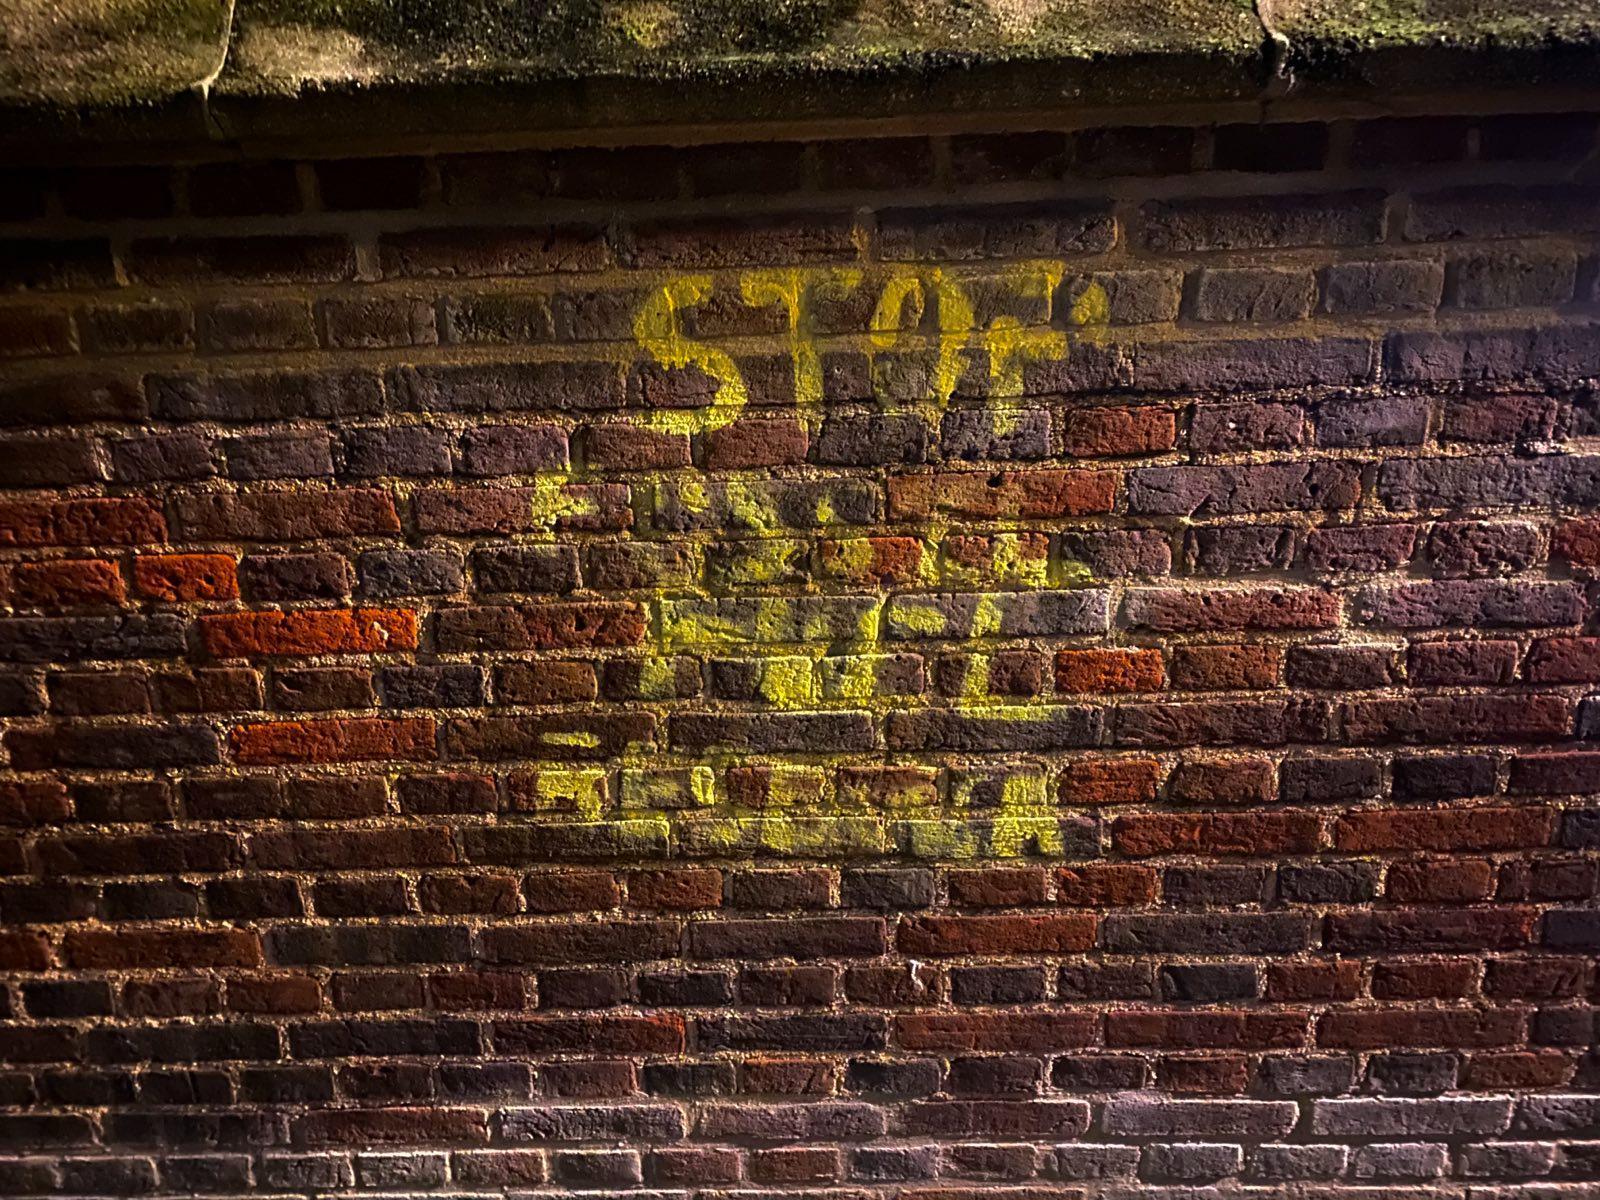 The wall of the Oxford Institute for Energy Studies has been stencilled with the worlds "STOP FOSSIL FUEL RESEARCH" in yellow.